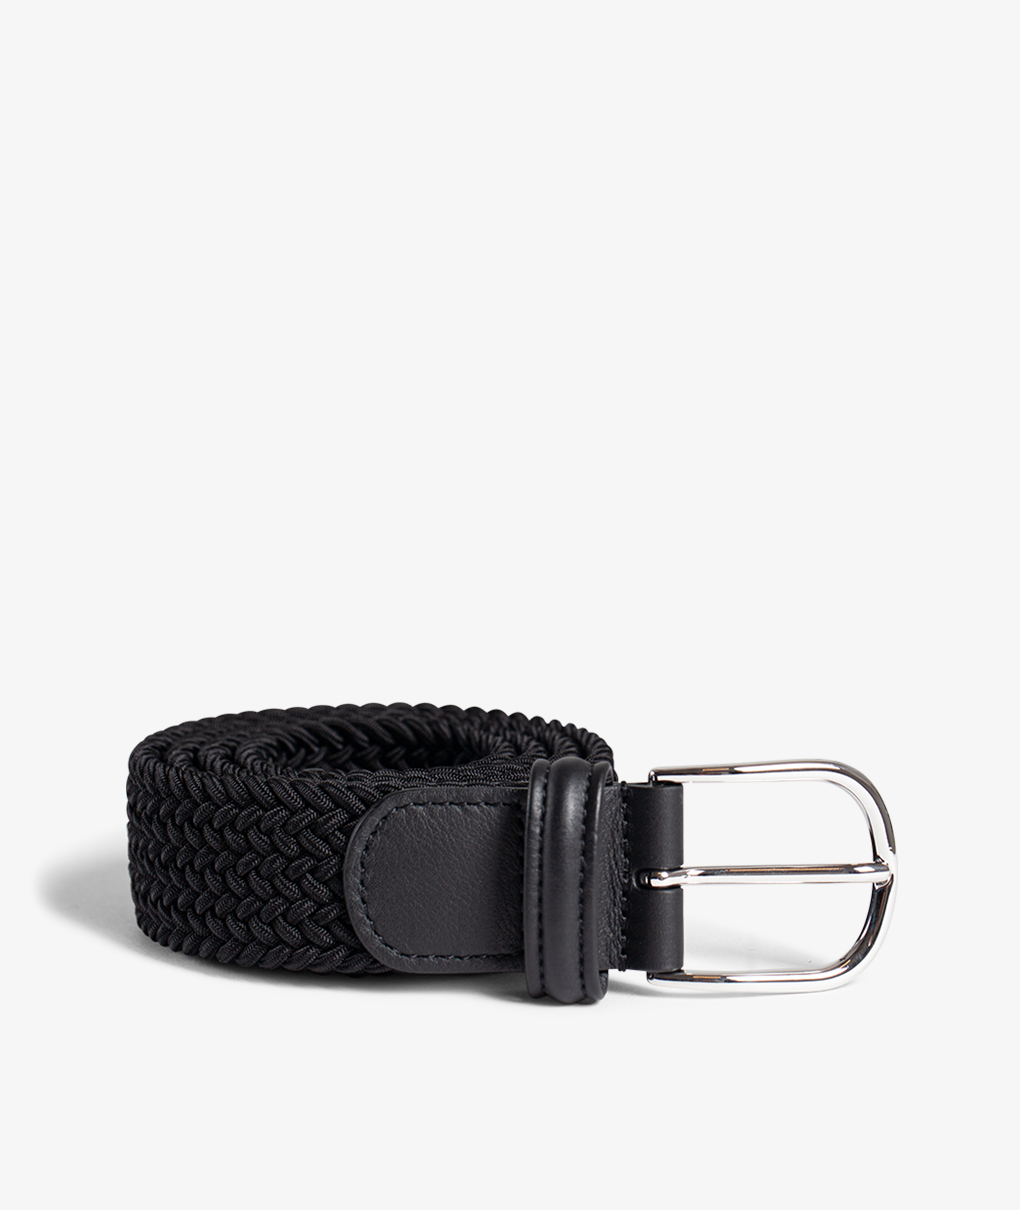 Norse Store | Shipping Worldwide - Anderson's Braided Nylon Belt